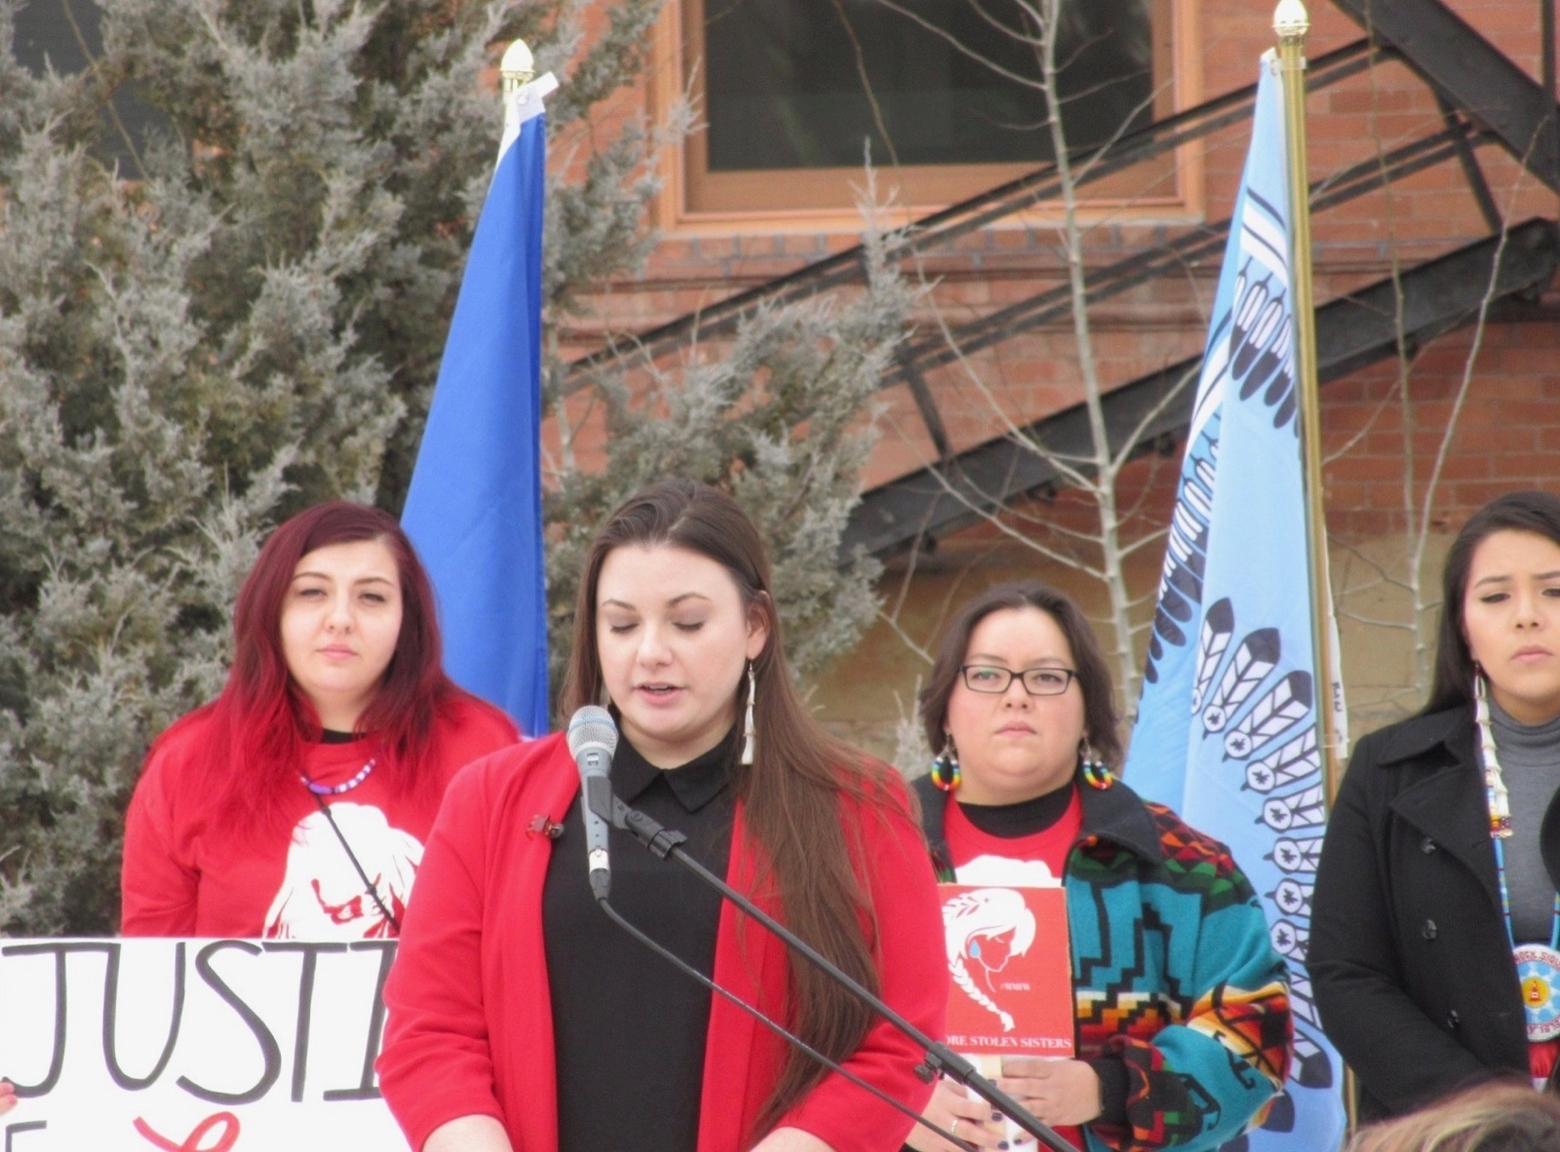 Erika Ross, flanked by indigenous women from across Montana, delivered remarks based on her exhaustive research. Photo by Phil Knight